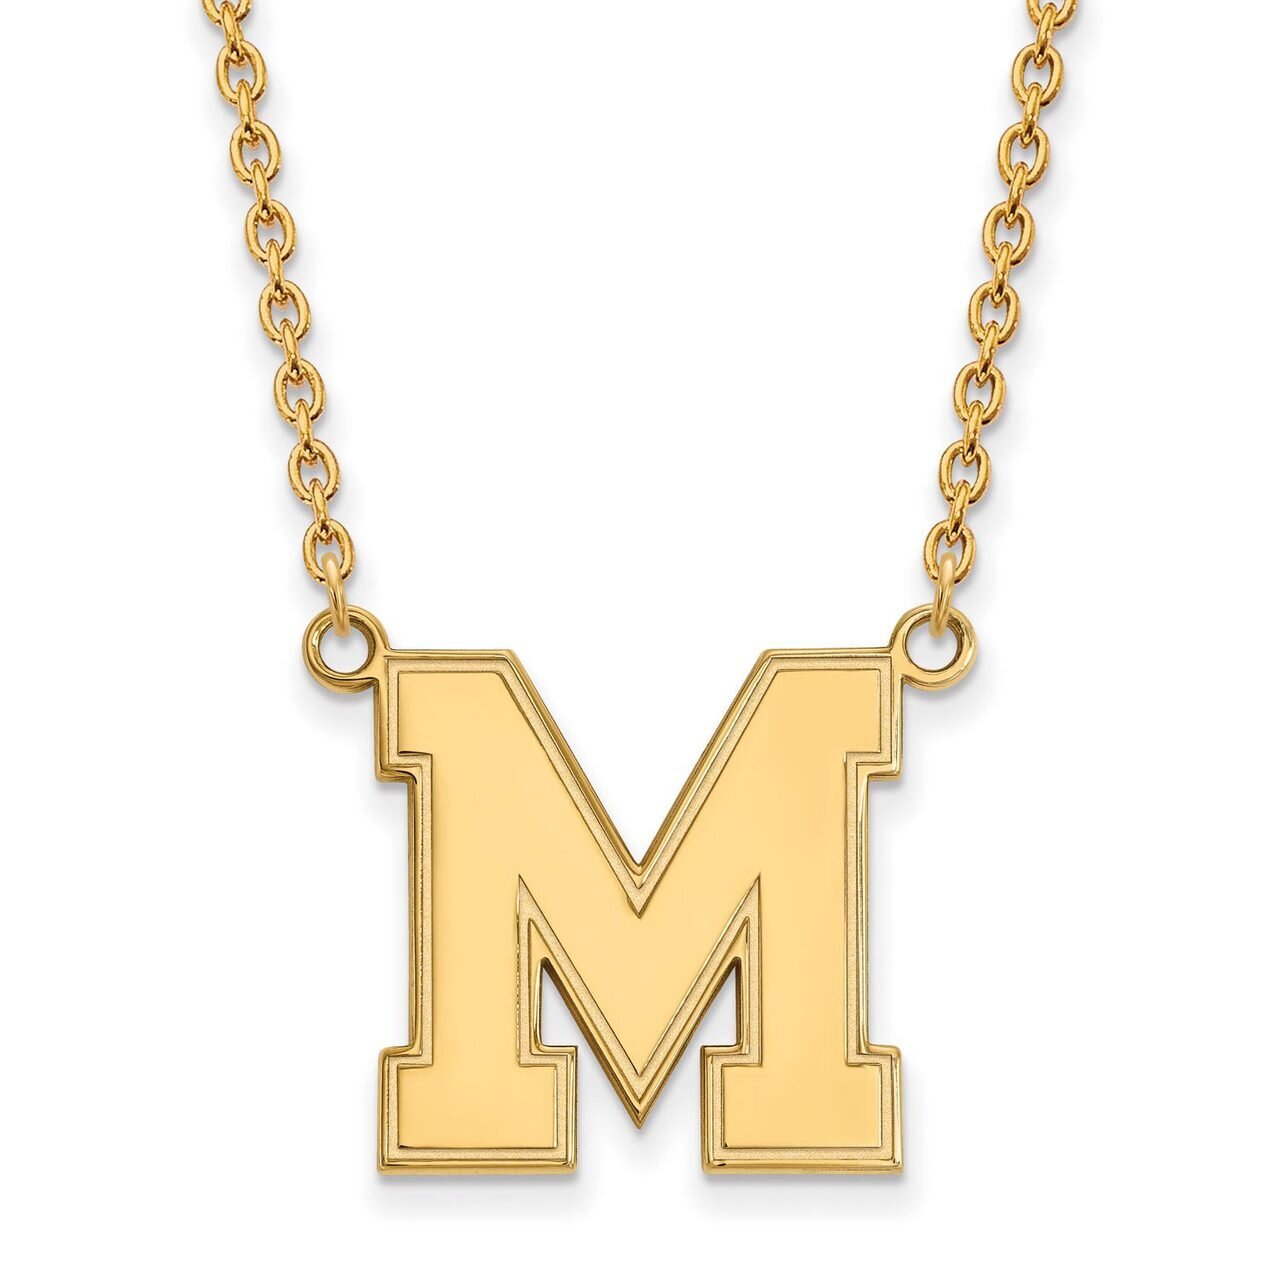 Univeristy of Memphis Large Pendant with Chain Necklace 10k Yellow Gold 1Y039UMP-18